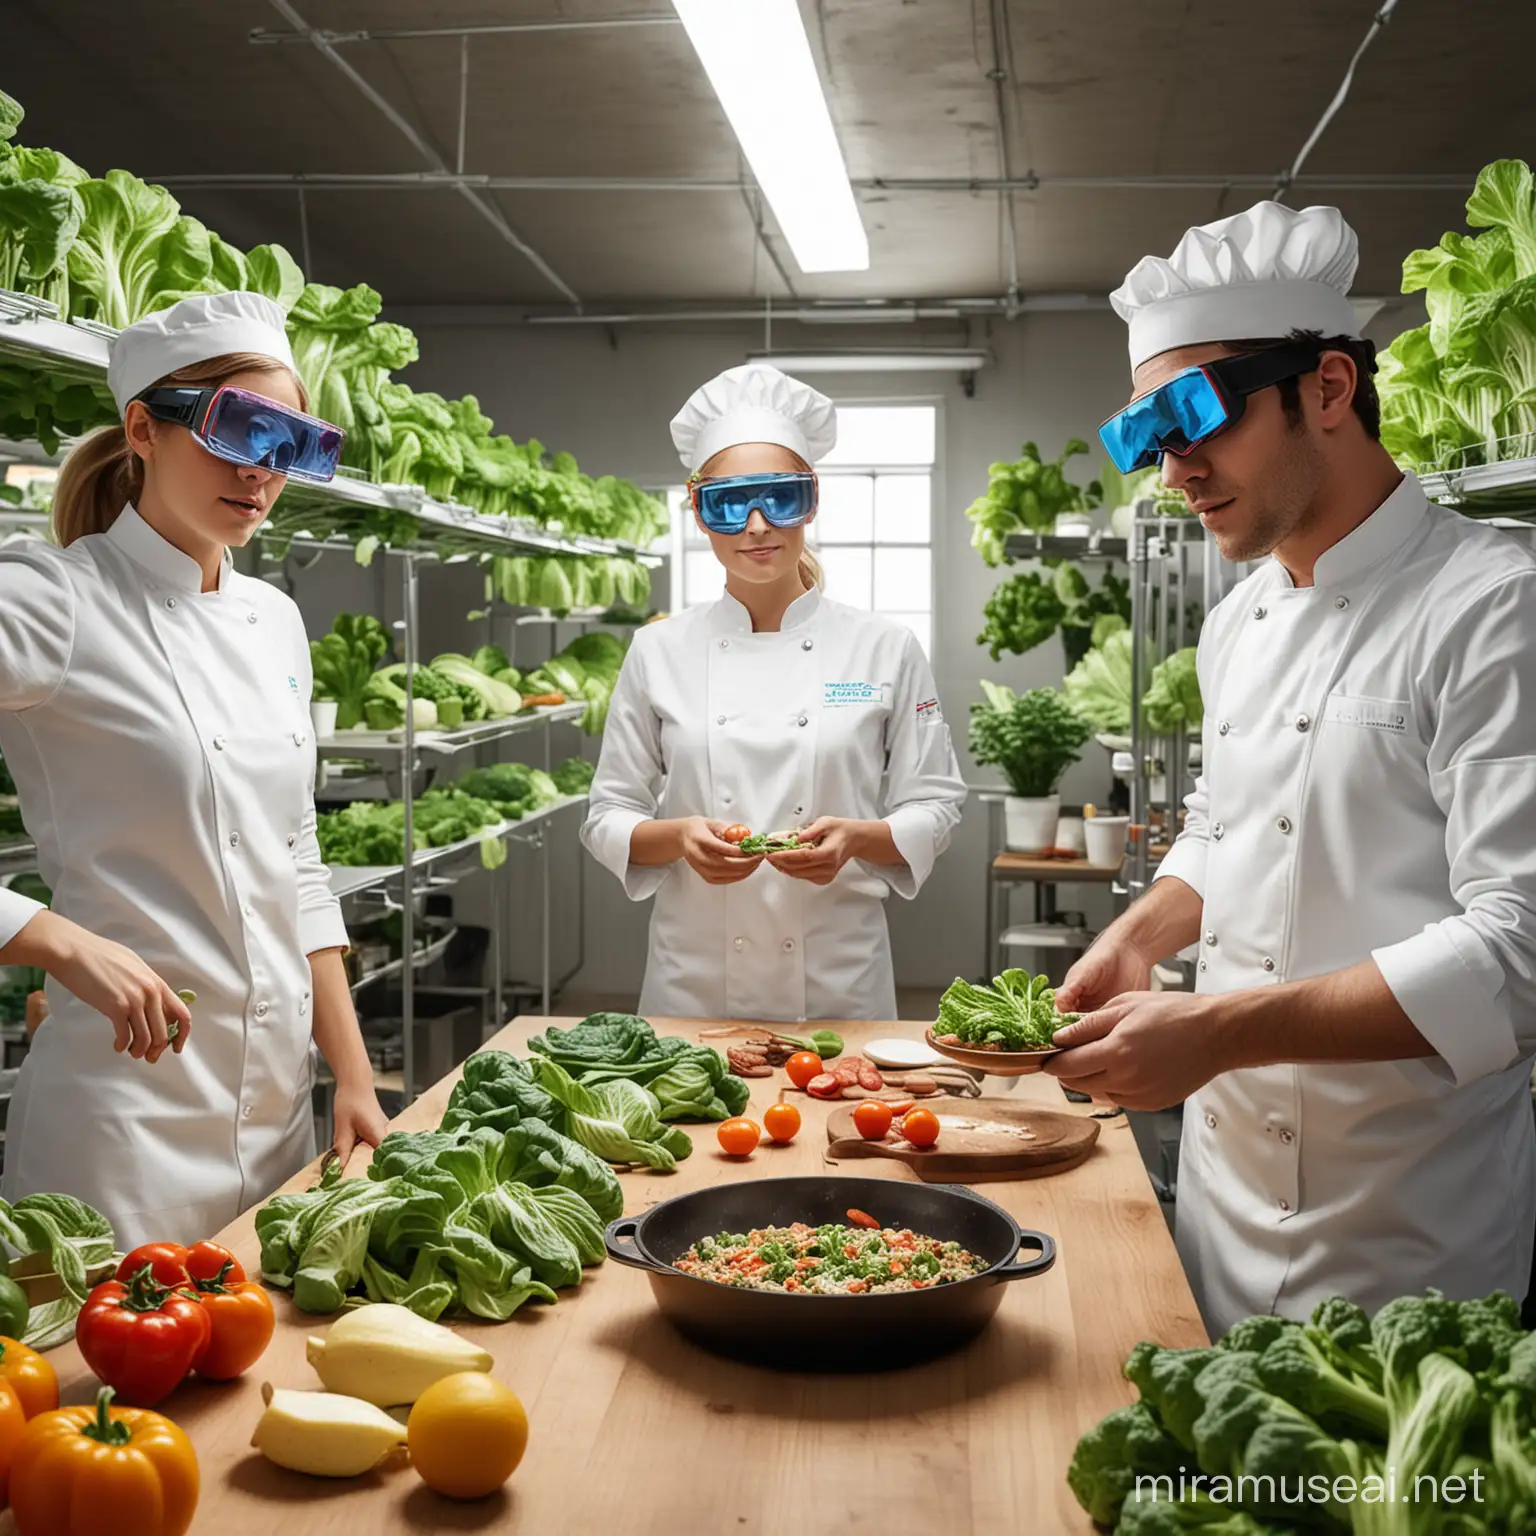 People cooking with 3D glasses with virtual chefs
make a far photo
add vertical farm